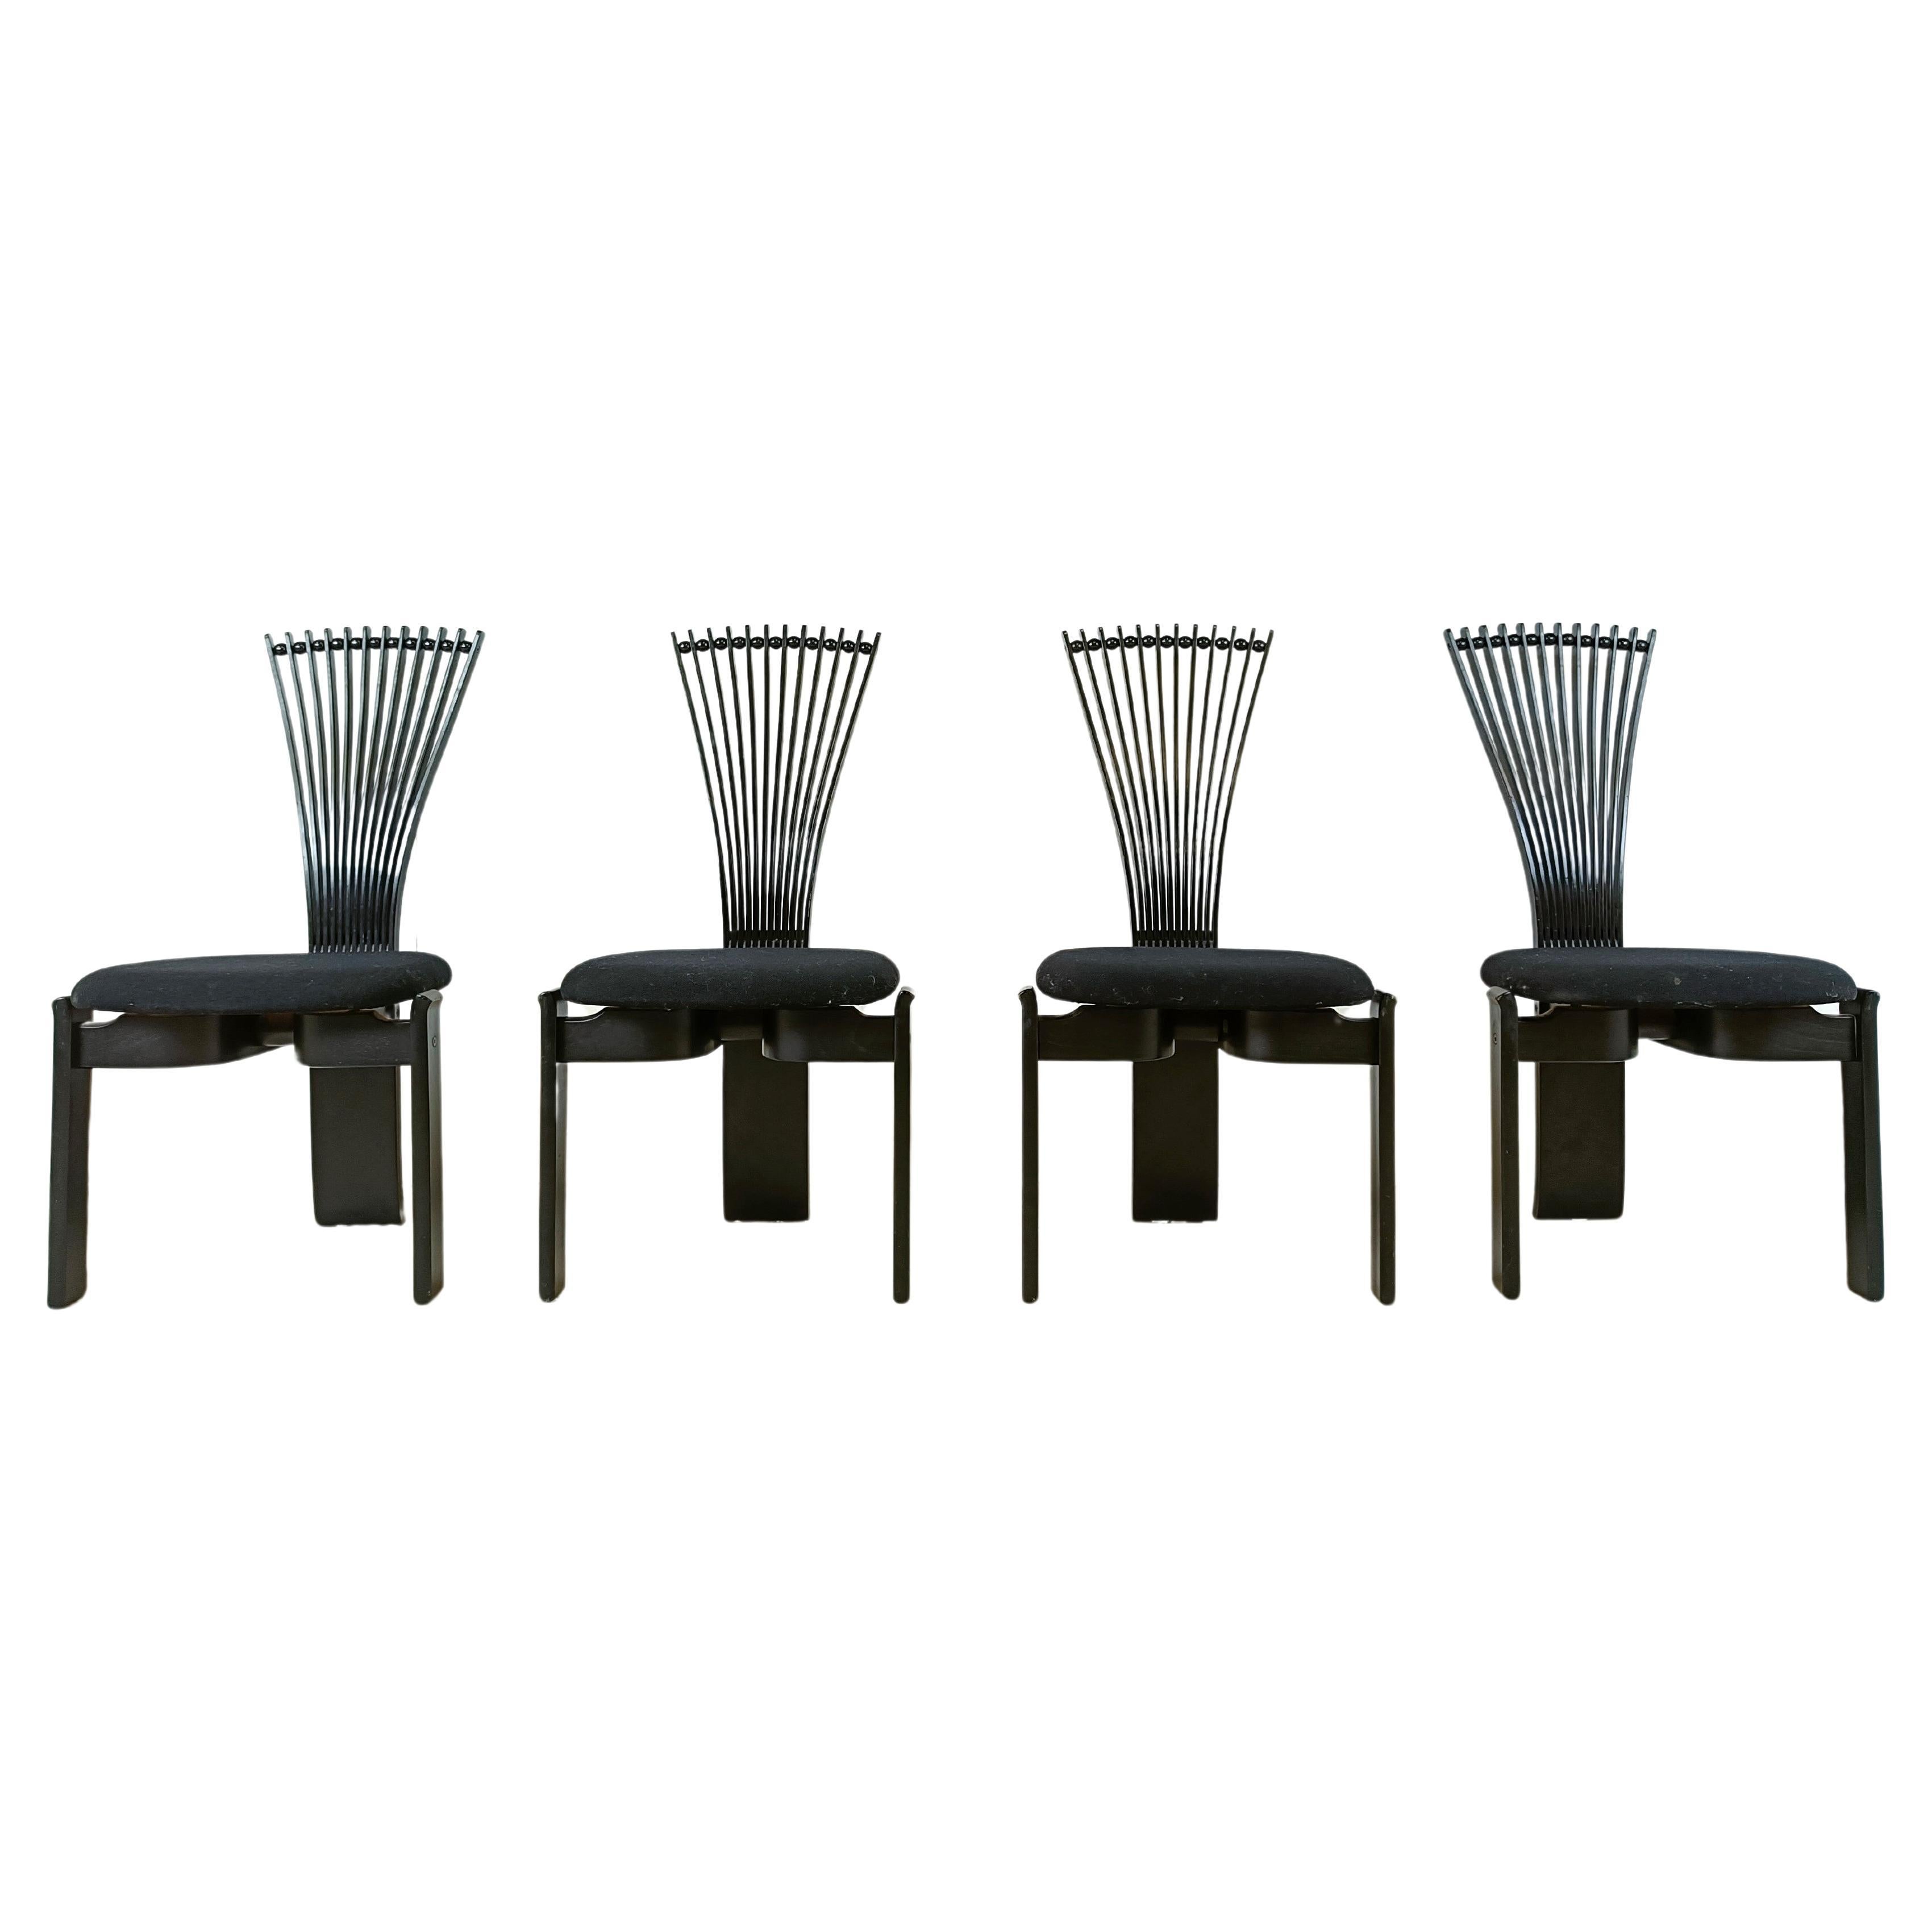 Totem chairs by Torstein Nislen for Westnofa, 1980s For Sale